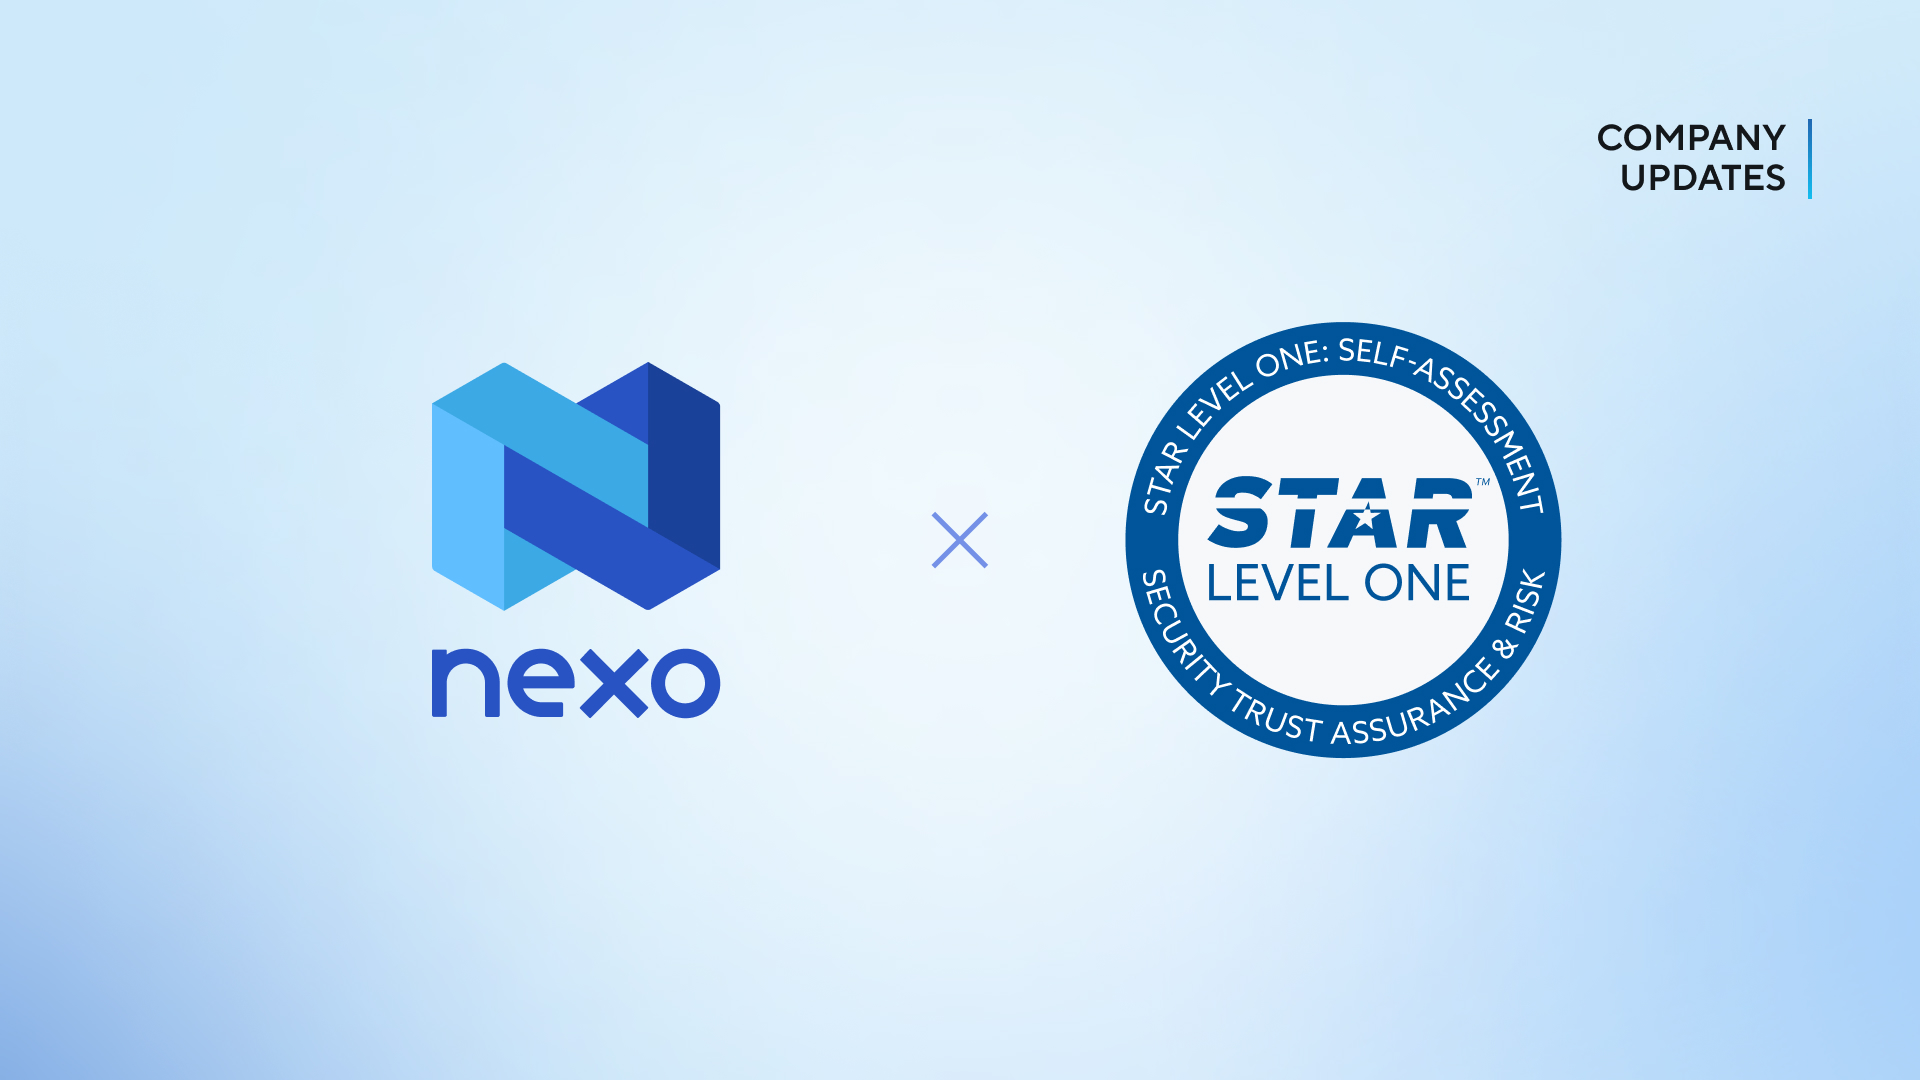 Nexo Strengthens Its Stance on Security and Transparency with CSA STAR Level 1 Certification